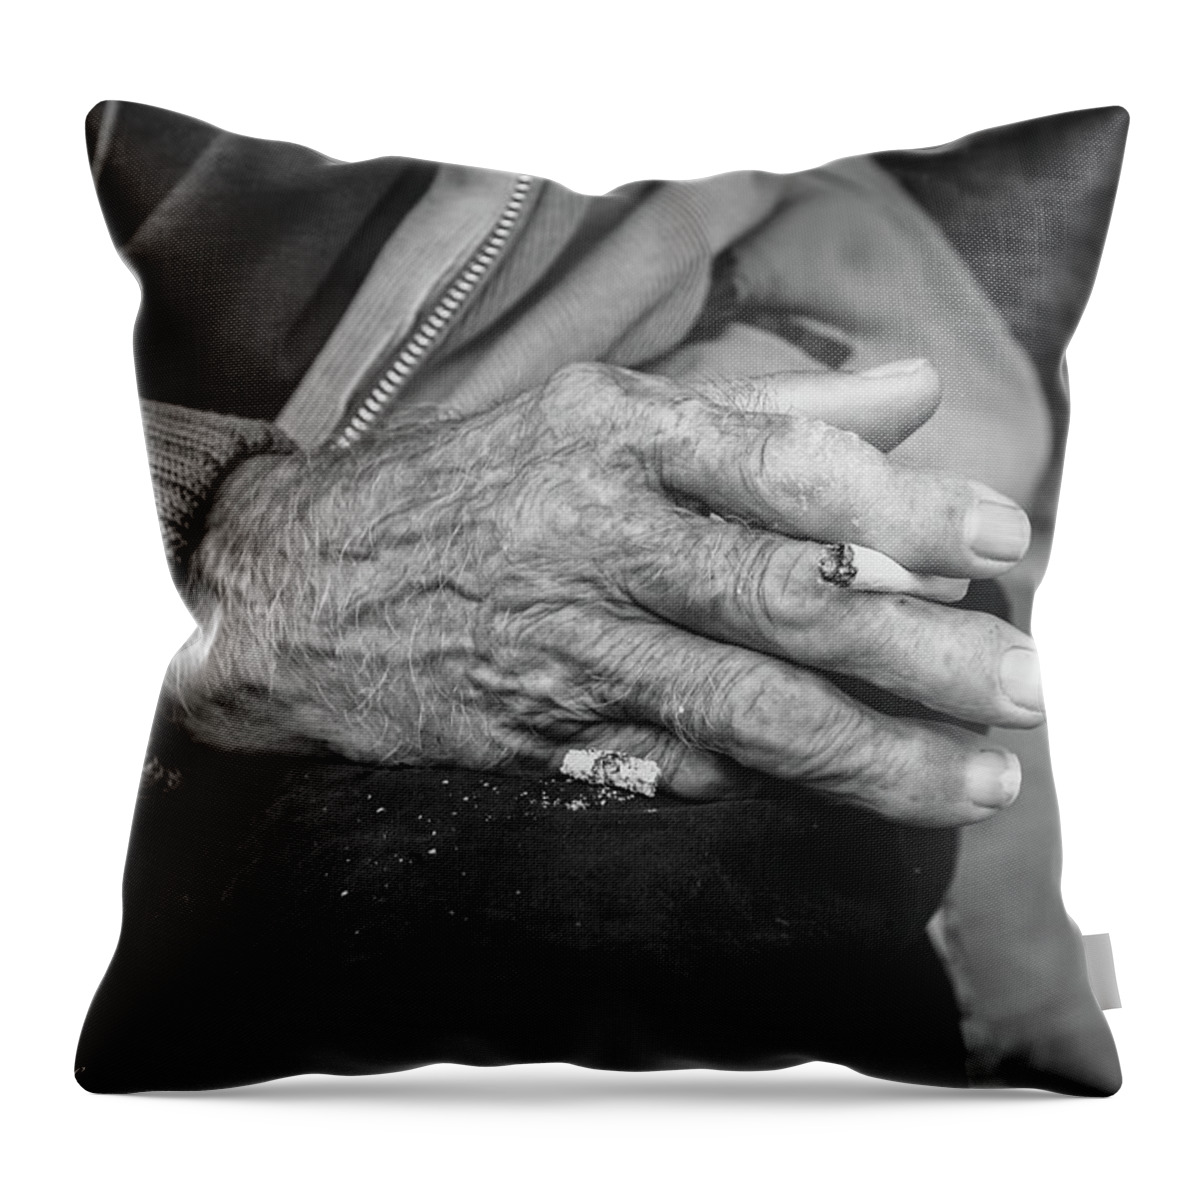 Hands Throw Pillow featuring the photograph Cigarette by David Lee